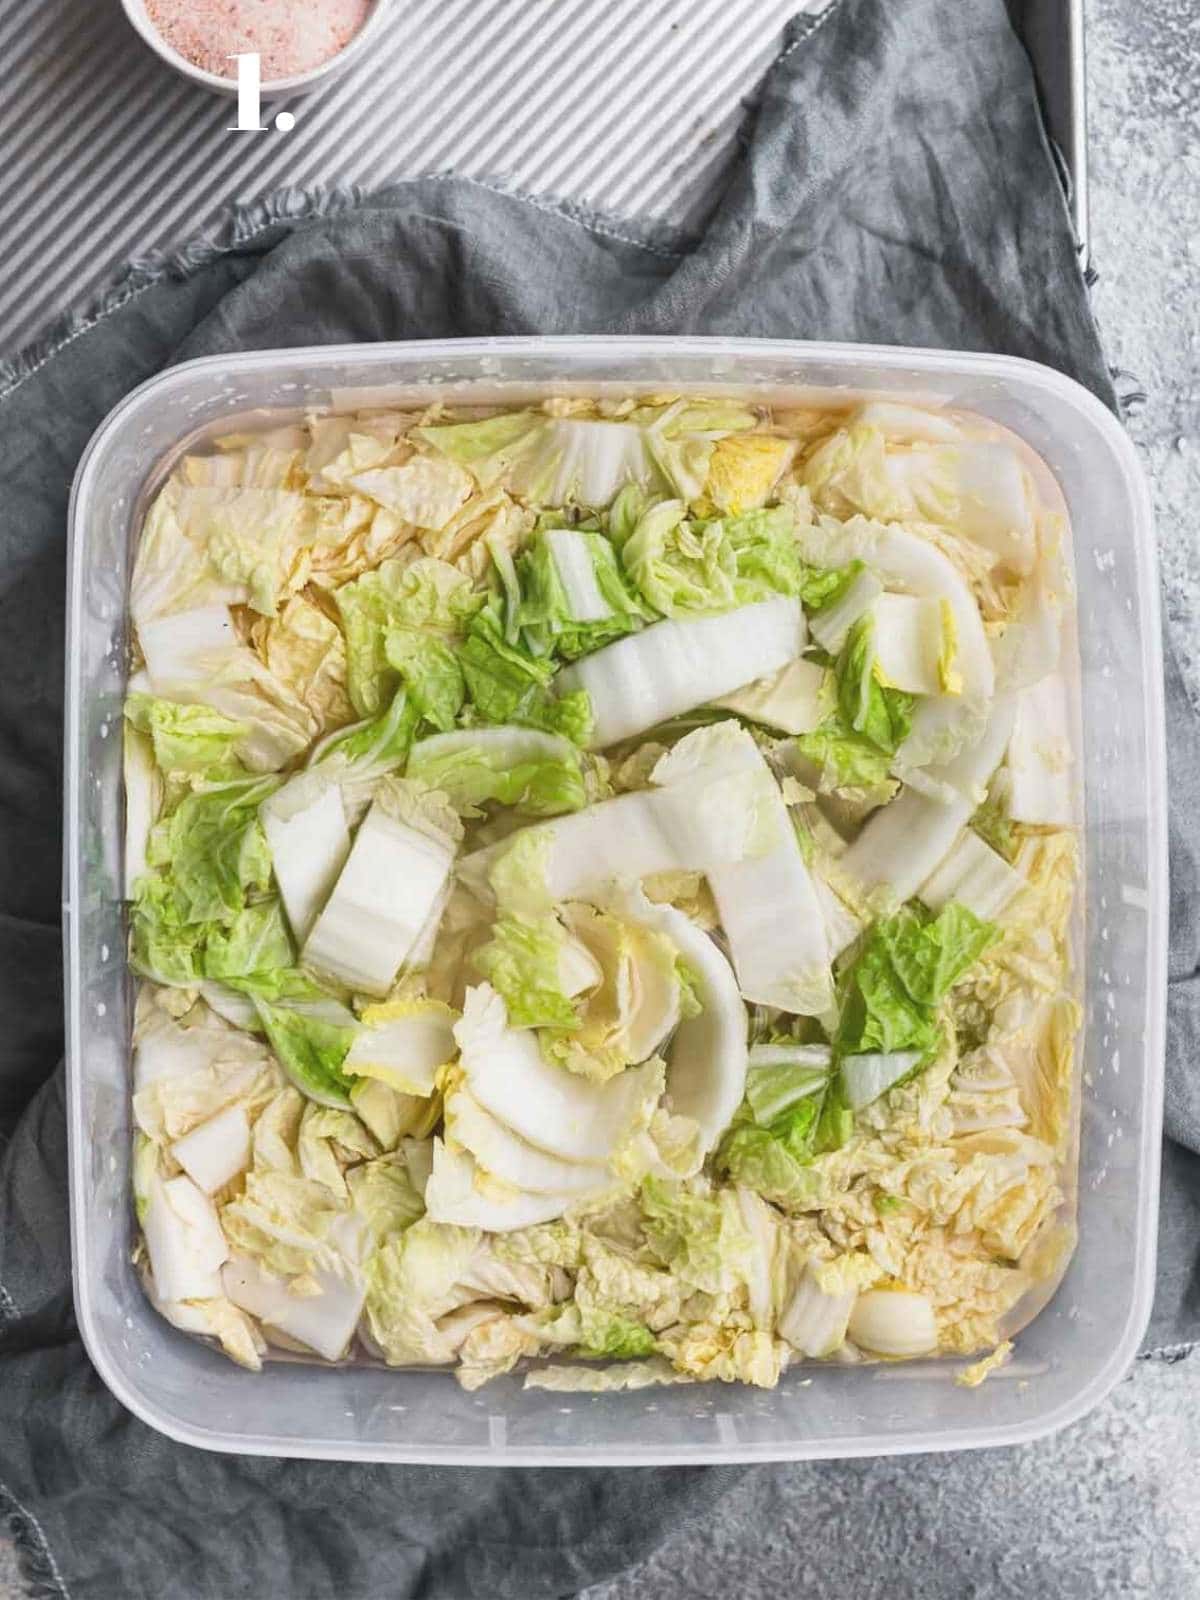 Chopped cabbage soaking in water in a container. 